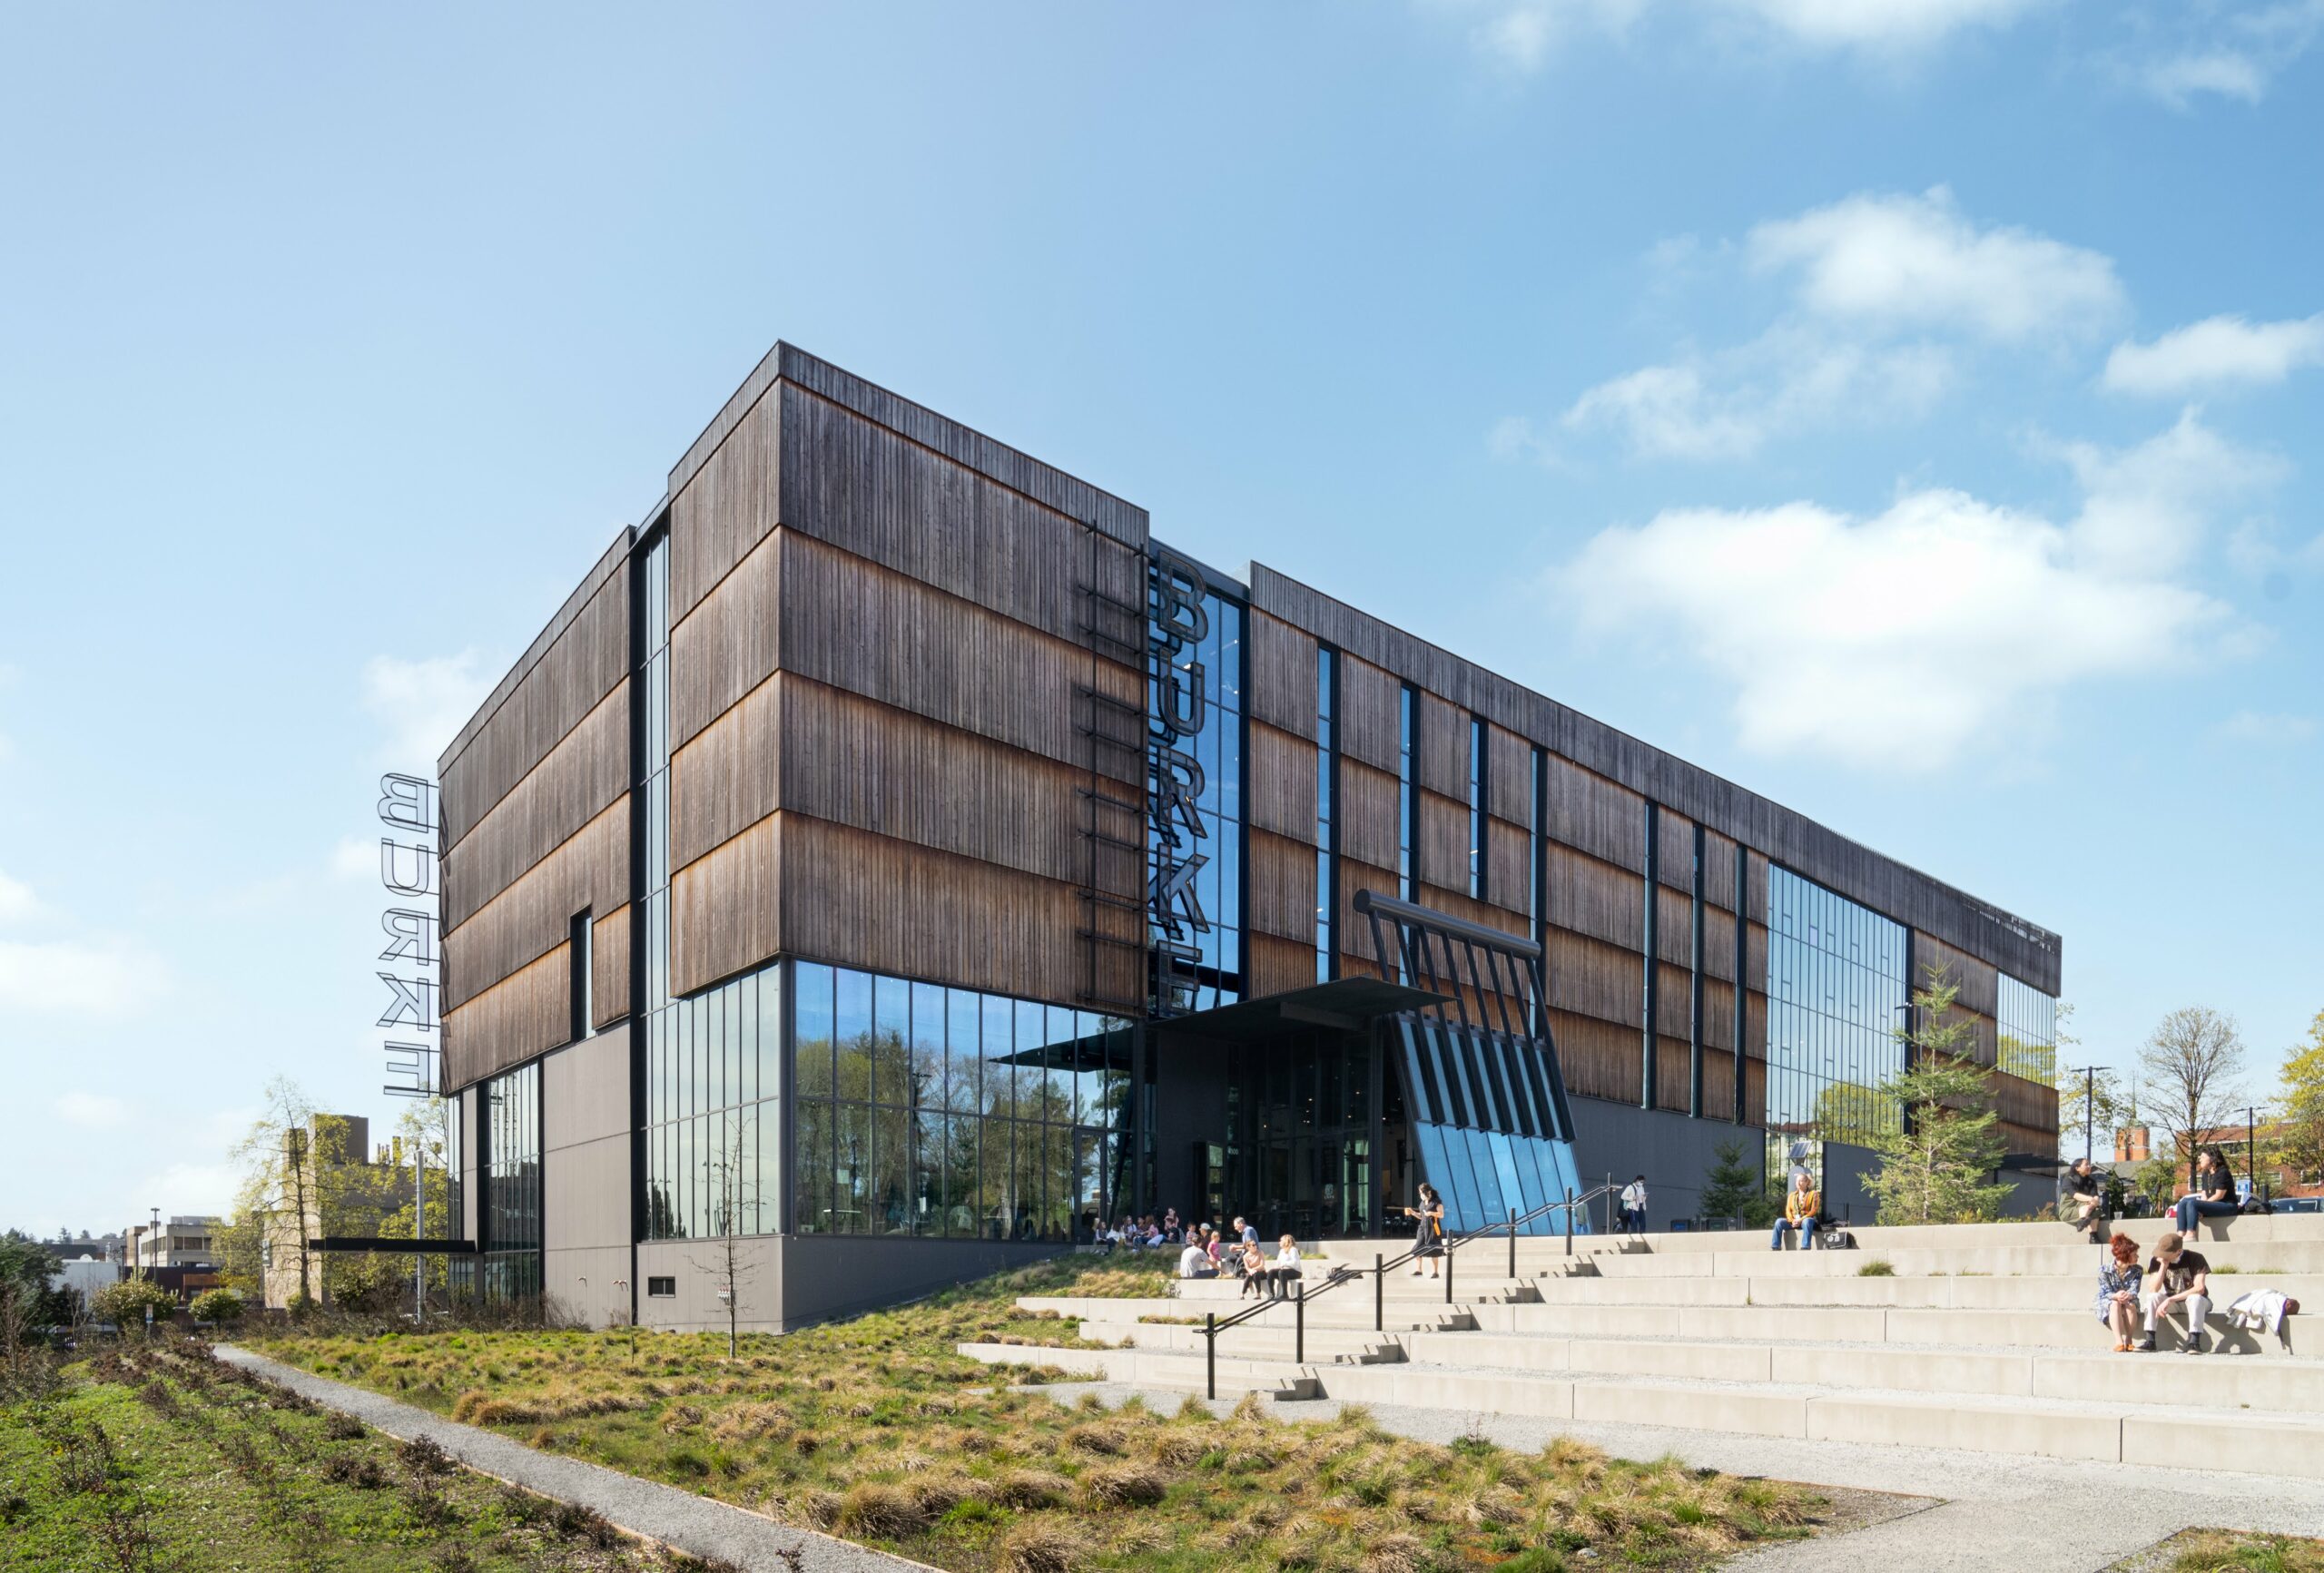 Exterior three-quarter view of the burke natural history museum during the day featuring kebony modified wood click in cladding